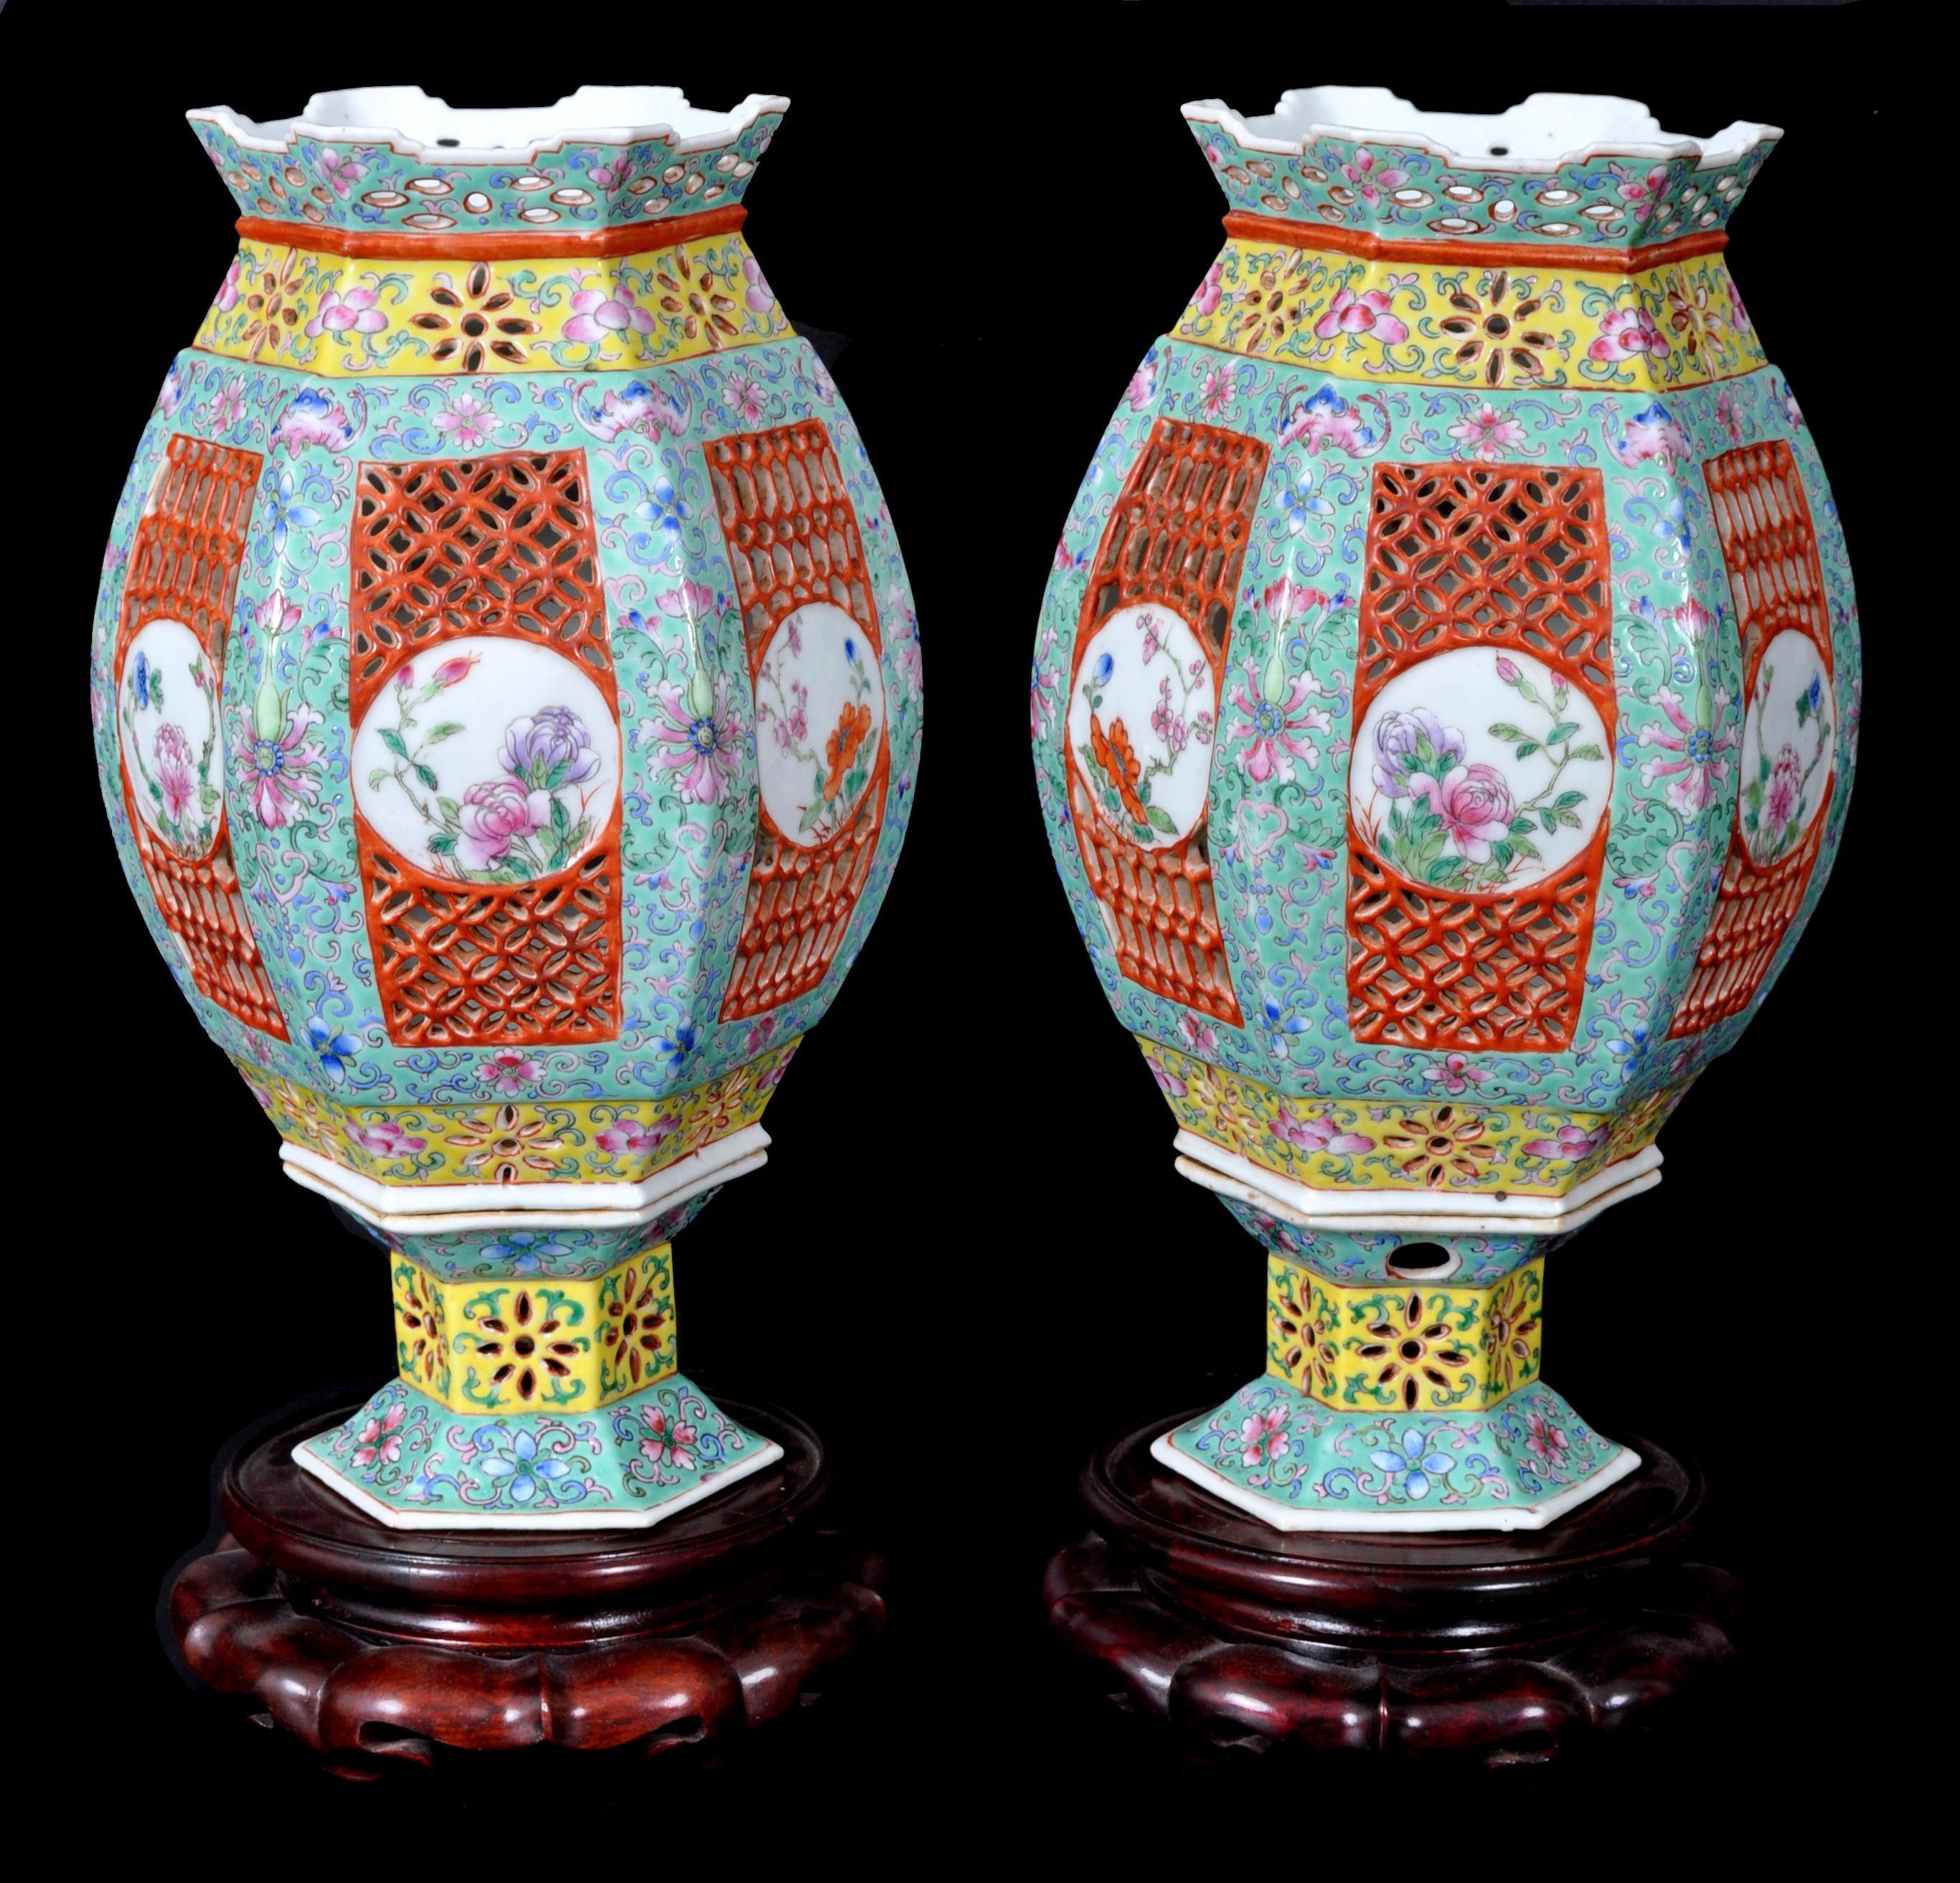 Early 20th Century Pair of Antique Chinese Republican Period Imperial Porcelain Wedding Lanterns